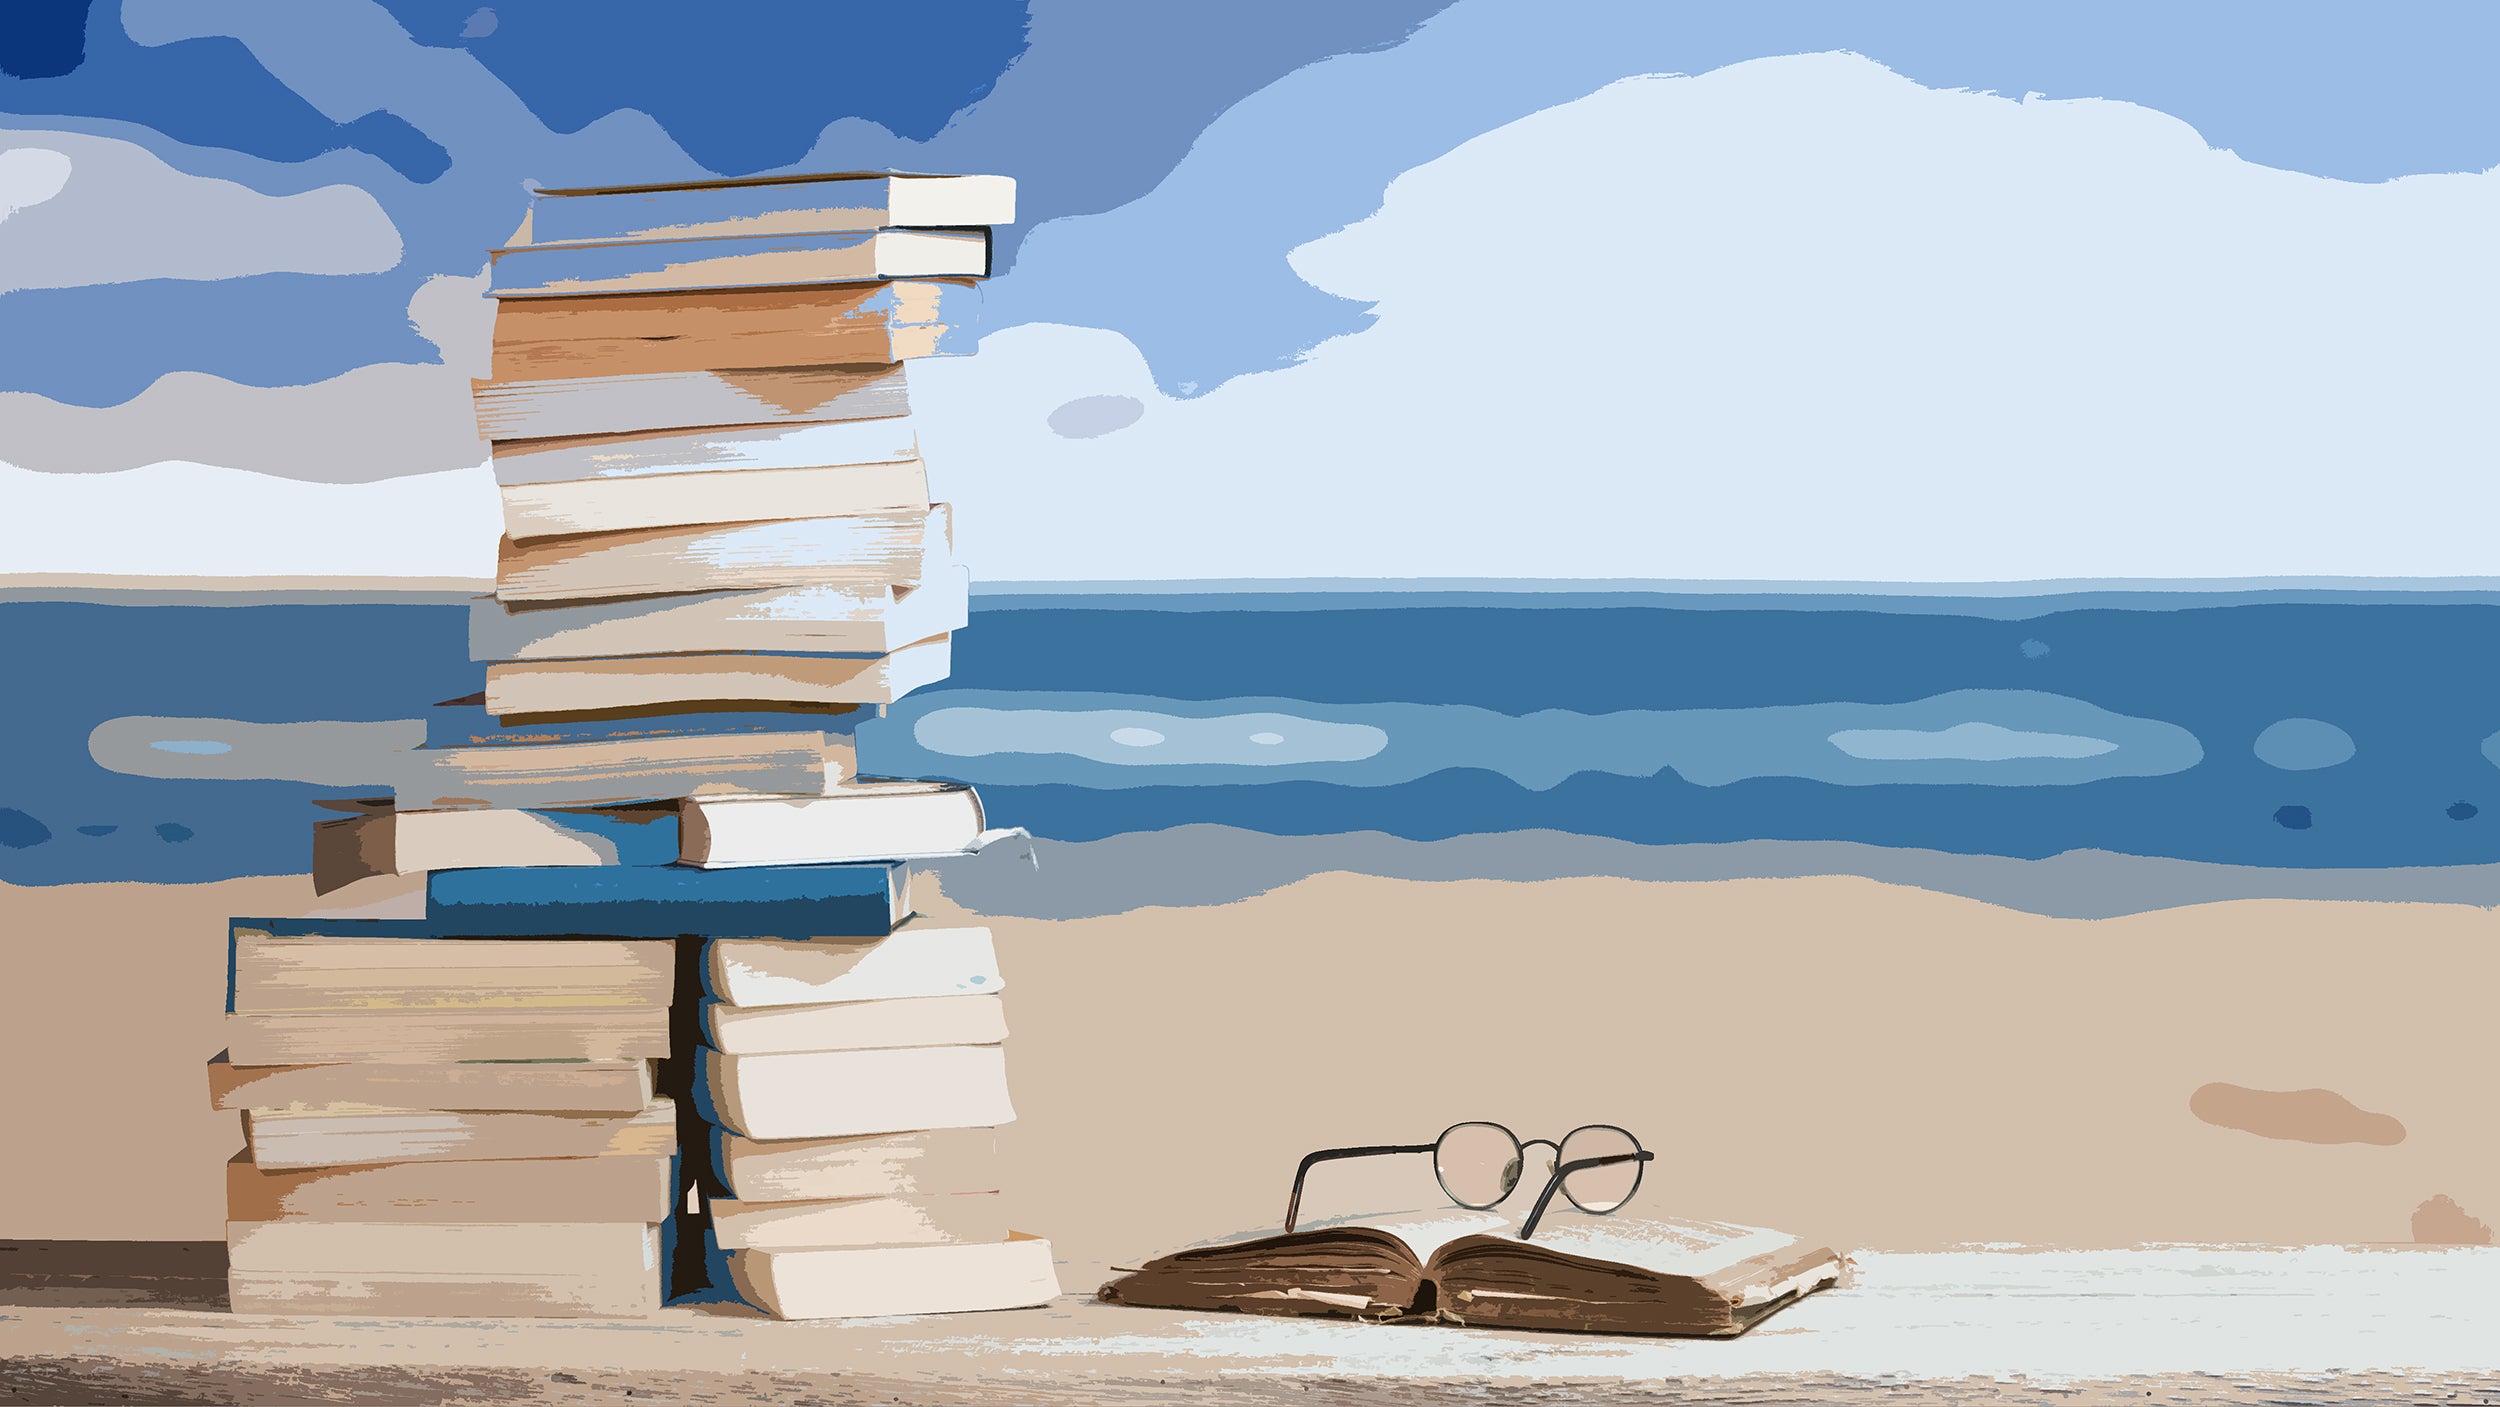 Illustration of books on a beach